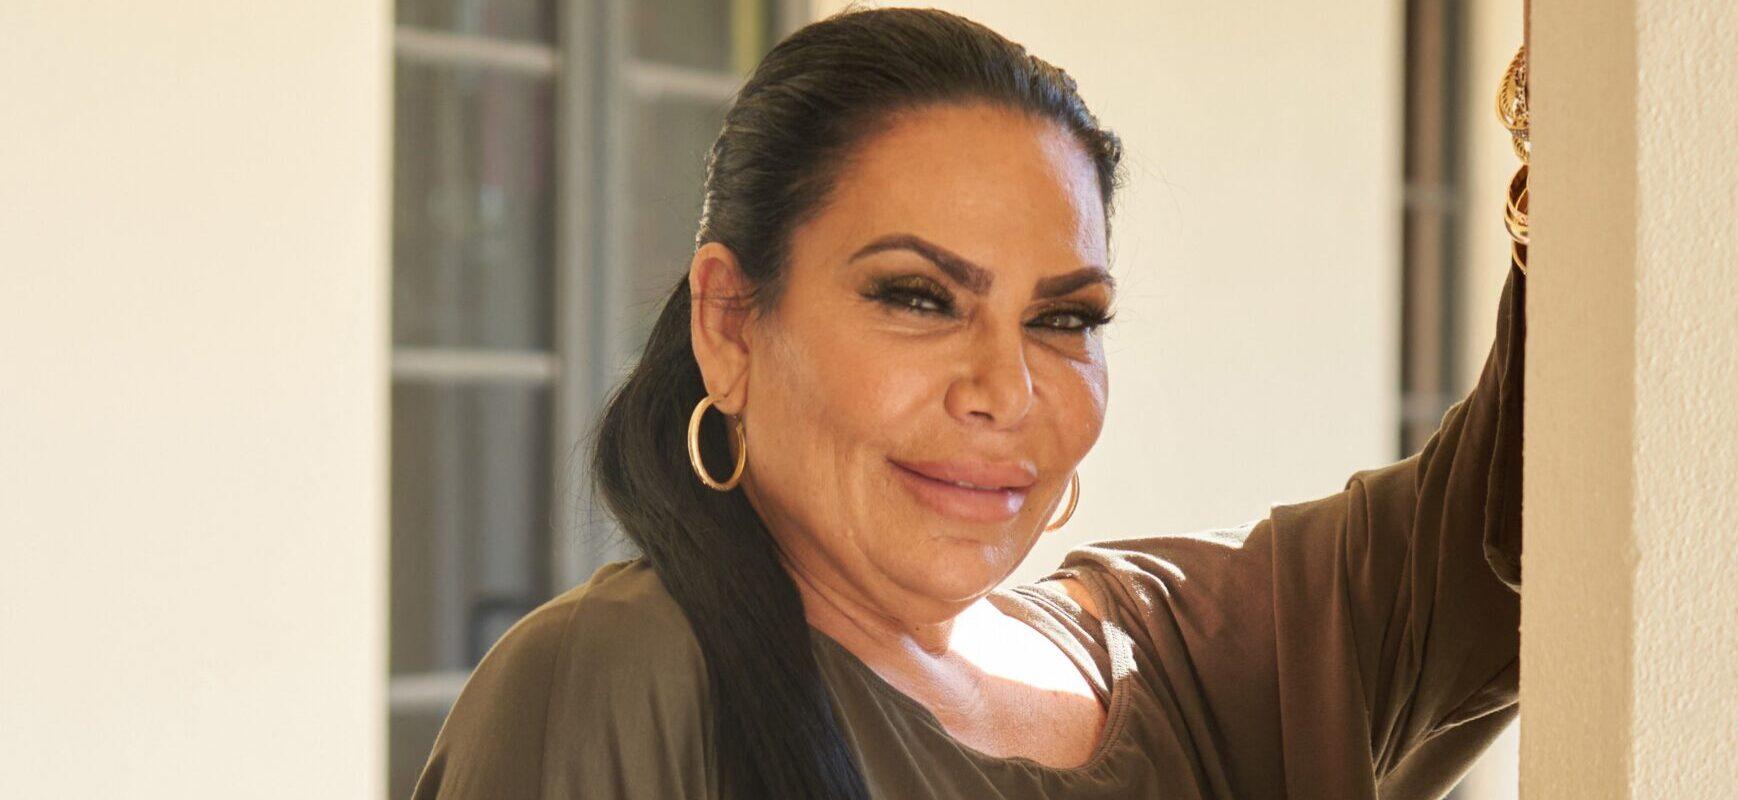 Renee Graziano is photographed at Benny's On The Beach Restaurant in Wellington, Florida